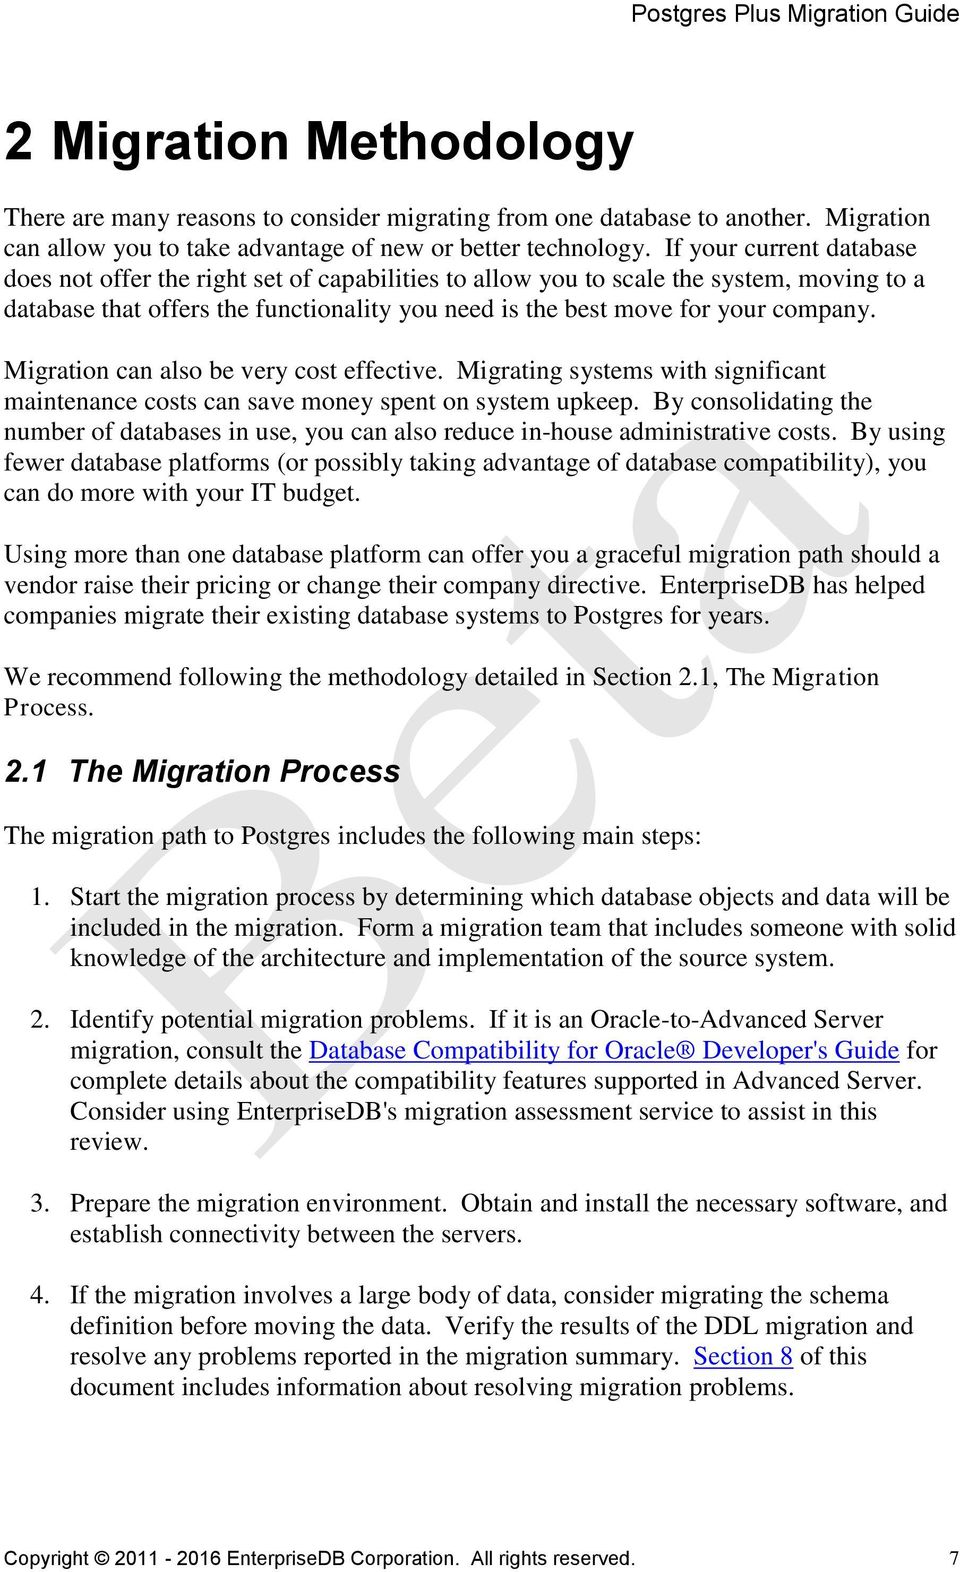 Migration can also be very cost effective. Migrating systems with significant maintenance costs can save money spent on system upkeep.